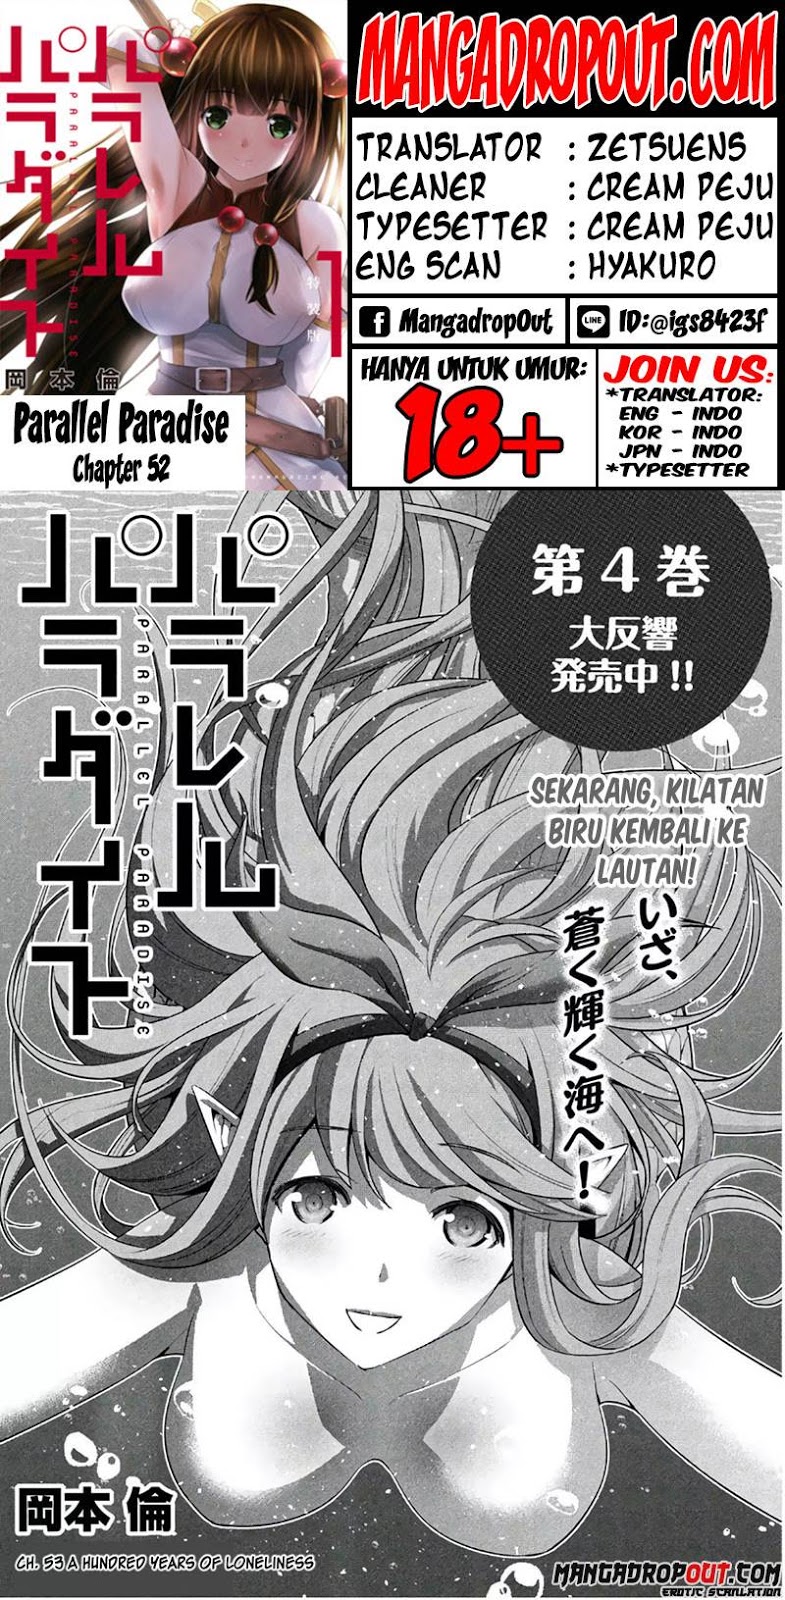 Parallel Paradise Chapter 52